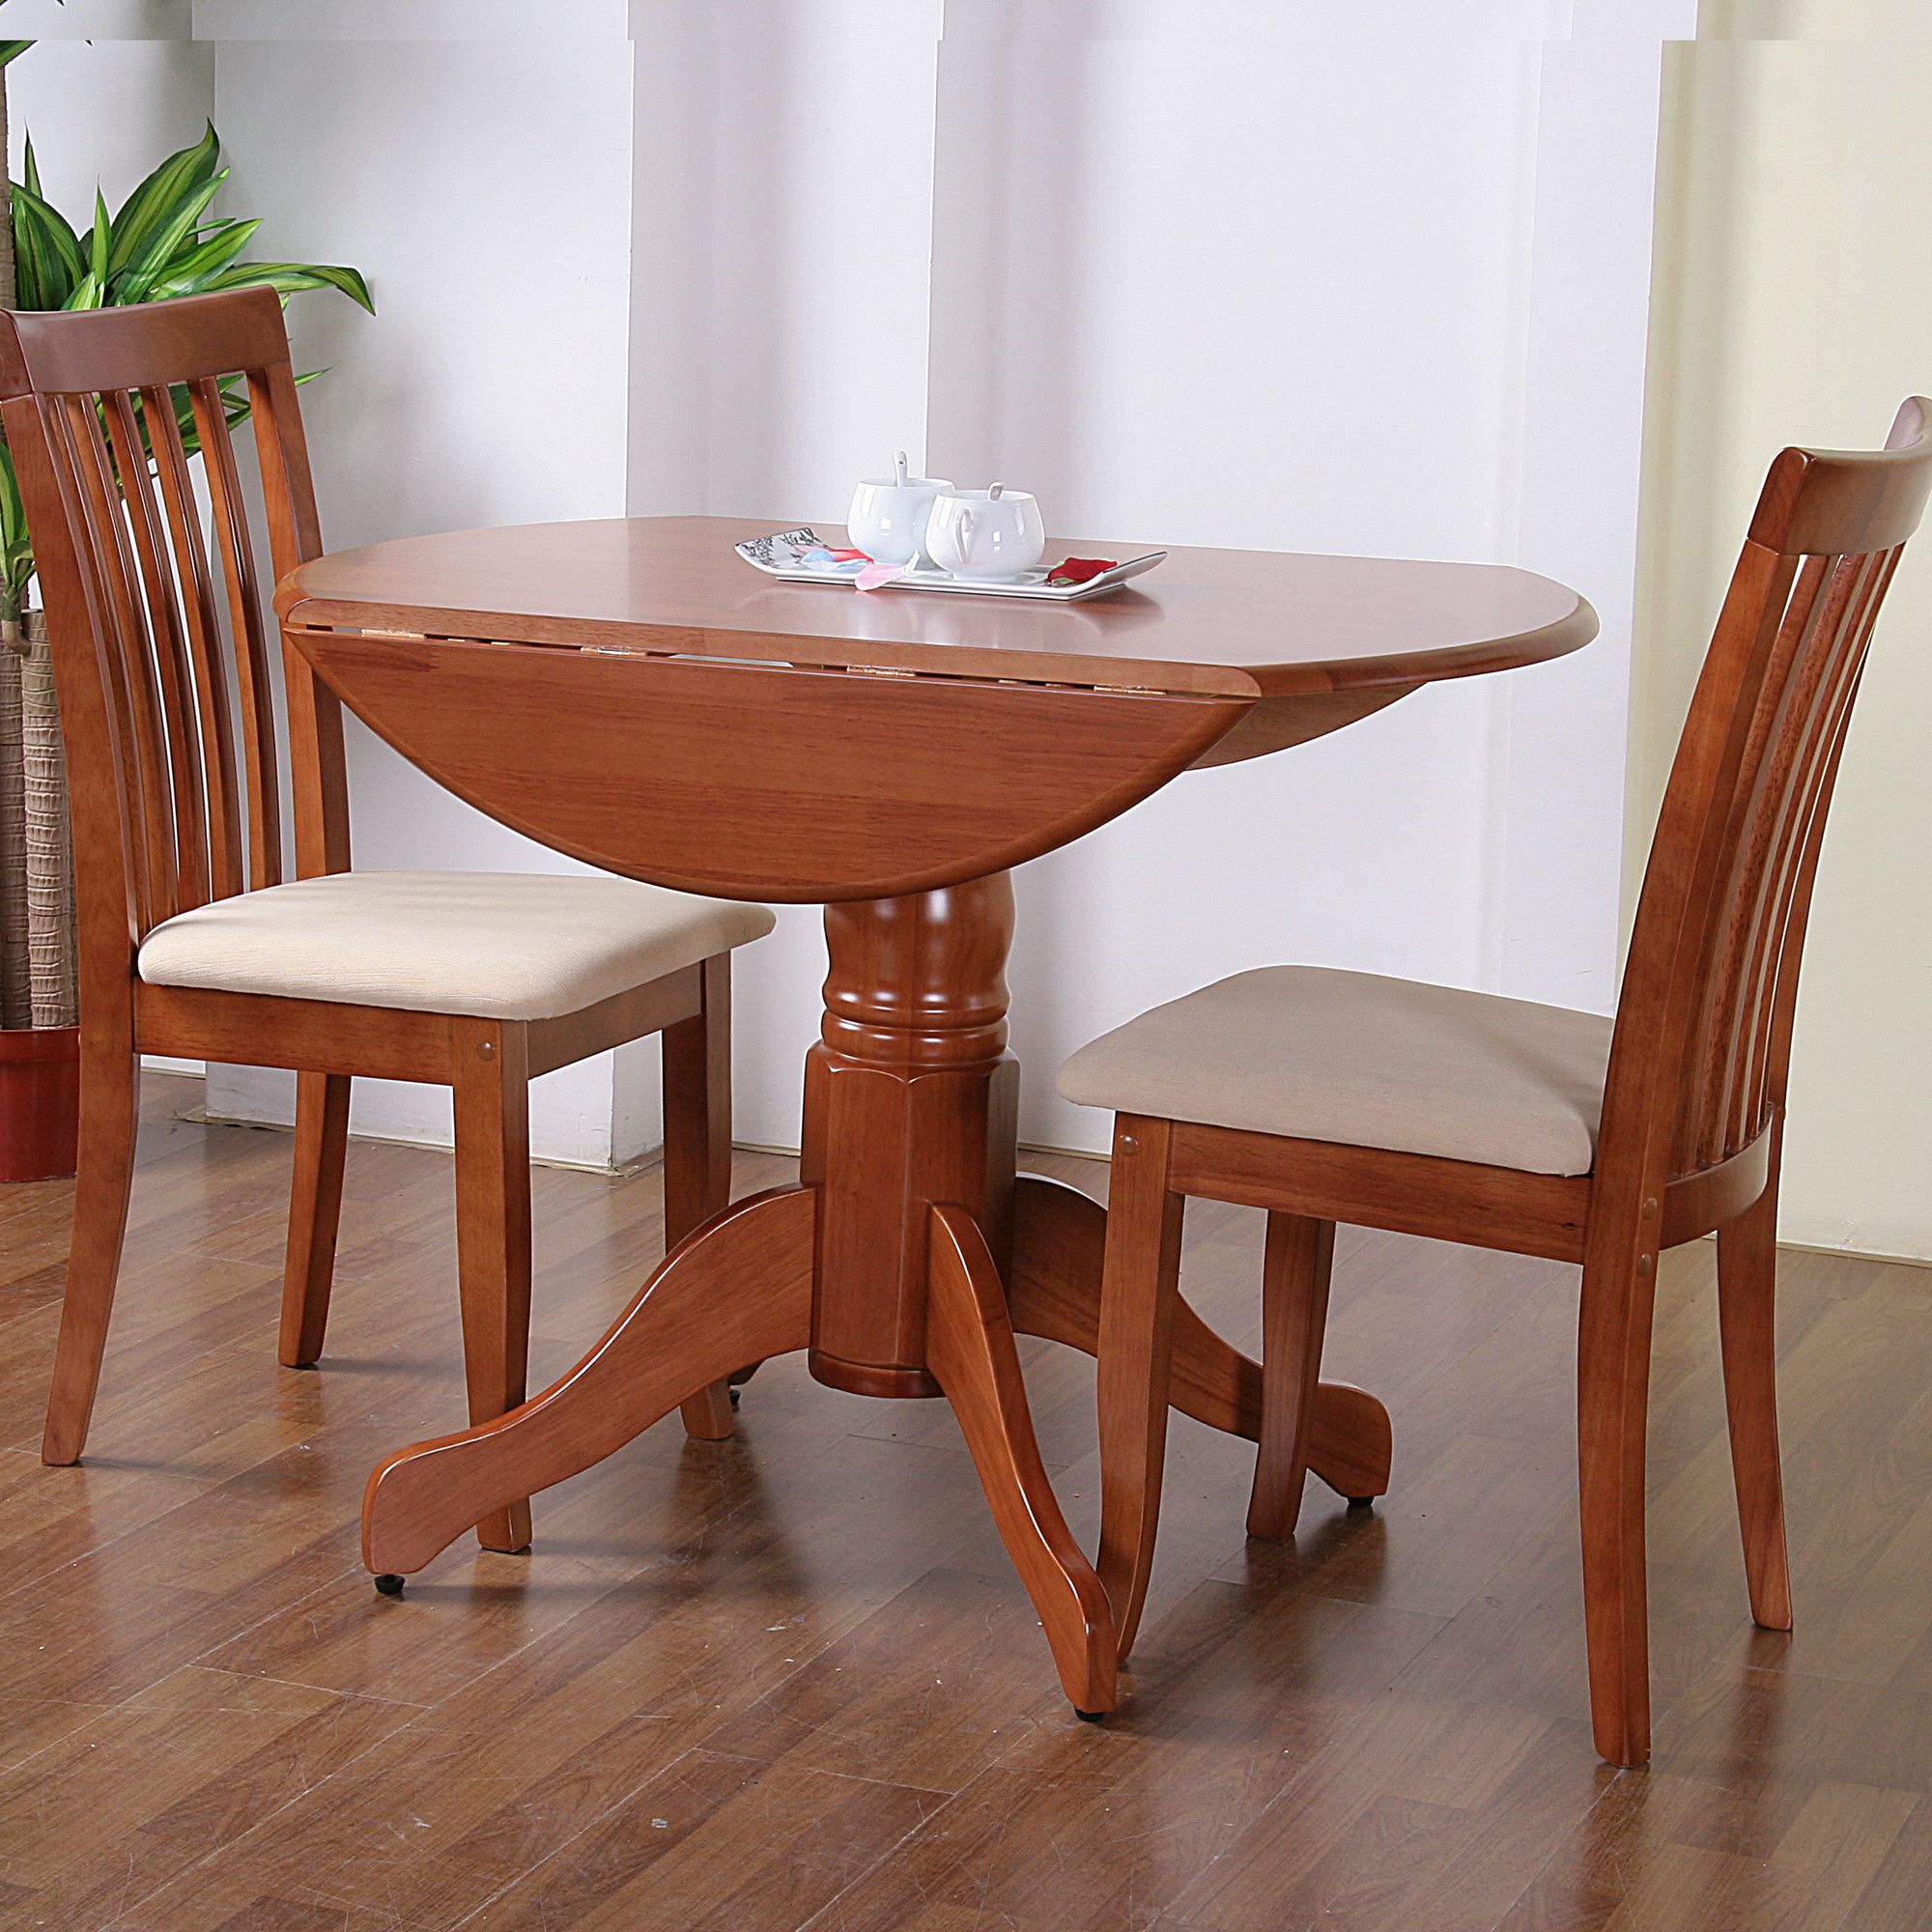 G&P Furniture Windsor House 3-Piece Bristol Round Drop Leaf Dining Set with Slatted Back Chair - Cherry at Tesco Direct